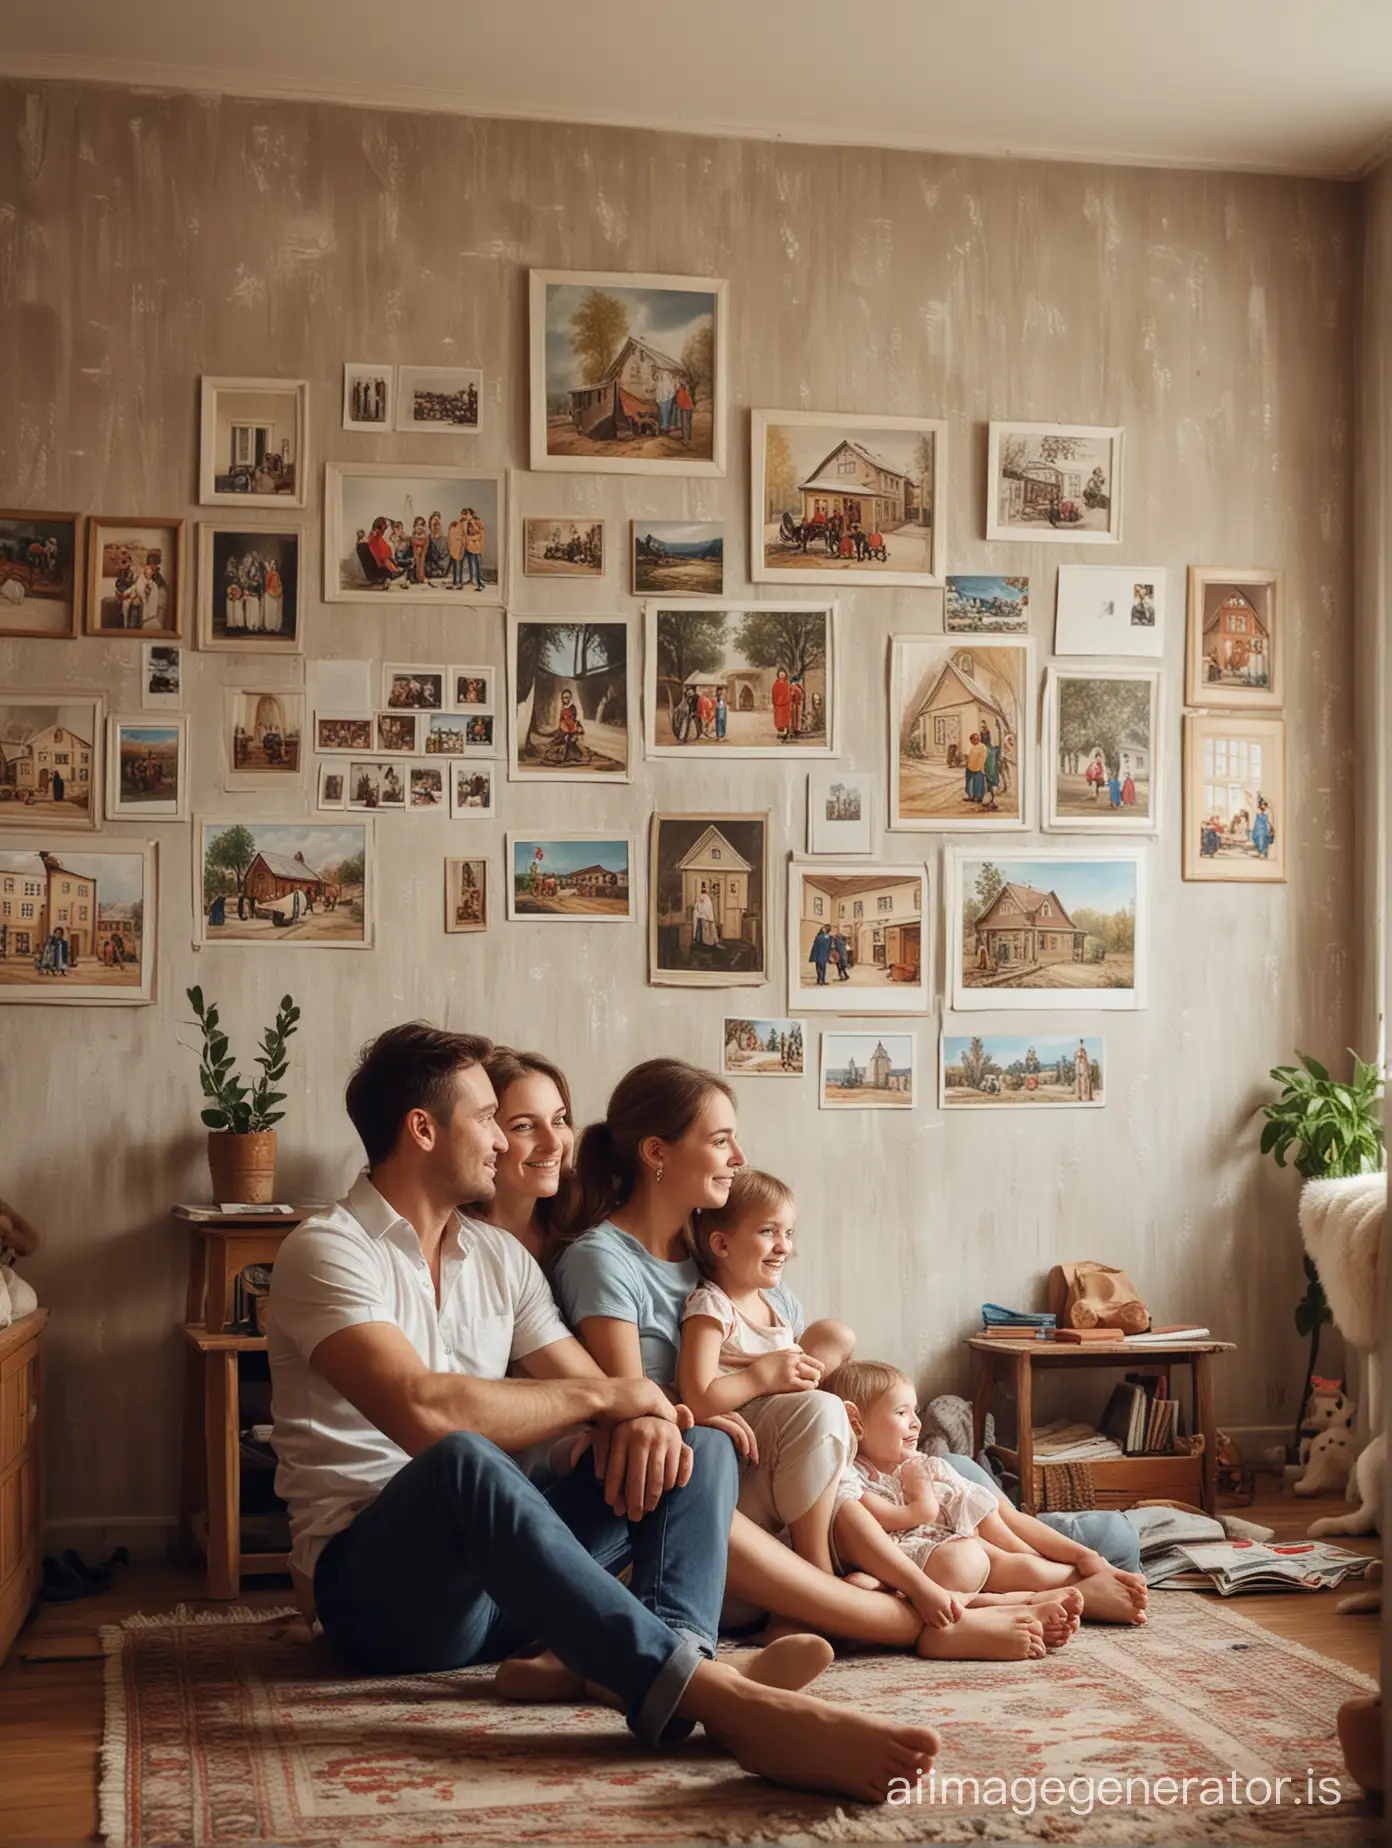 Photo of a Russian family in a city apartment, consisting of a mother, father, daughter, and son, sitting in their cozy small apartment. All family members are looking into the distance, dreaming of their future country house. Despite the limited space, the room feels warm and cozy. Family photos and children's drawings hang on the walls. The parents have dreamy smiles on their faces, while the children listen with excitement and interest to their stories about the future home.